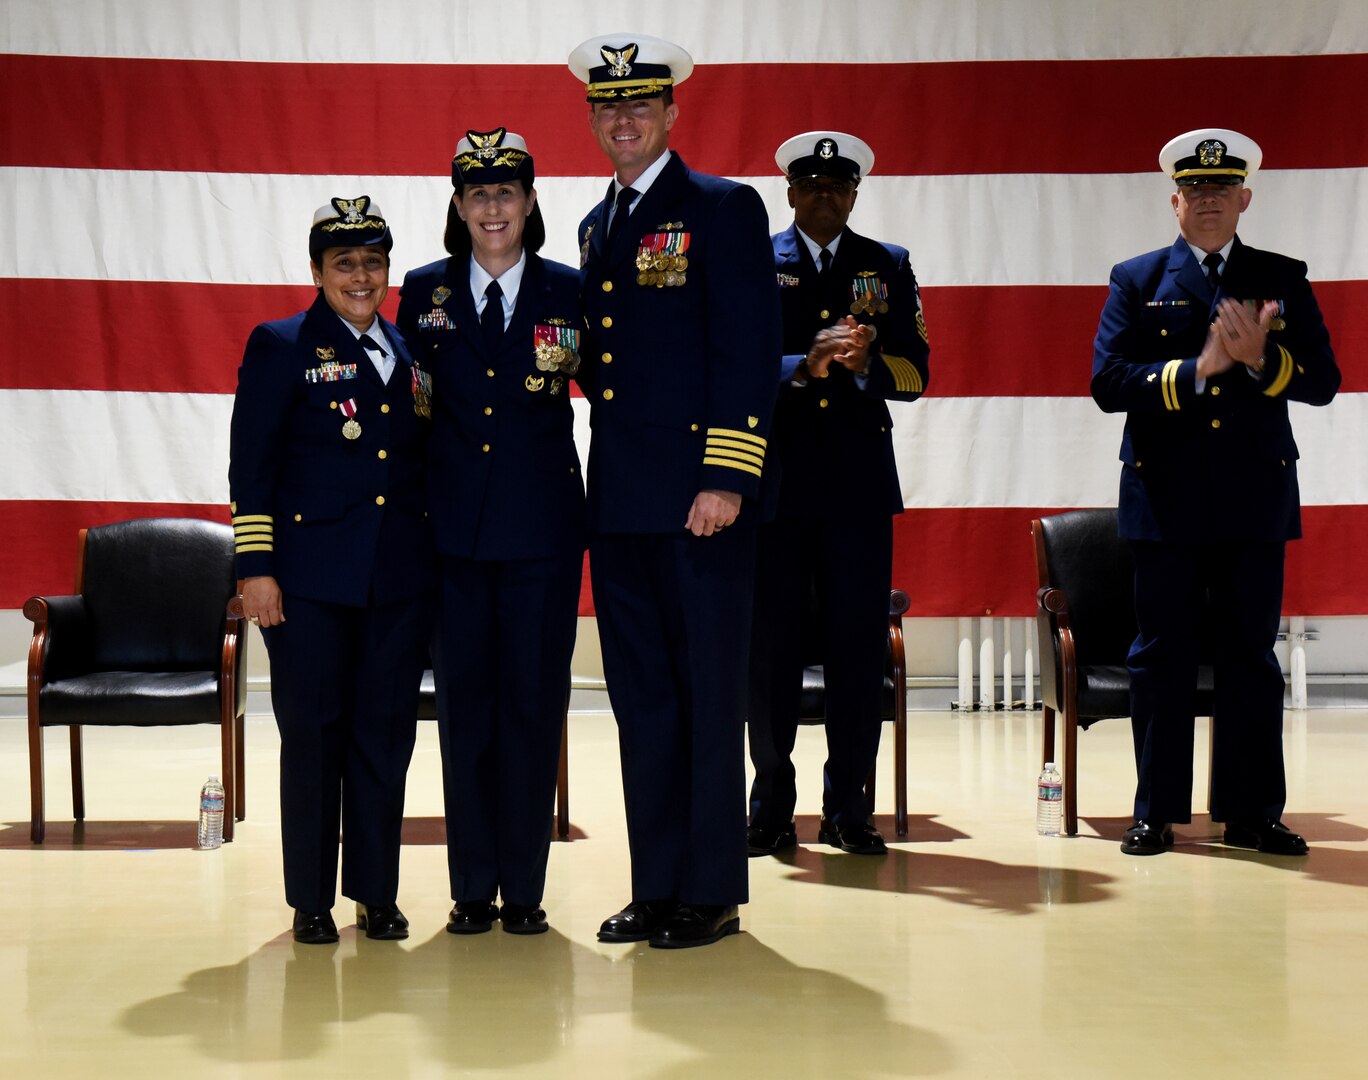 Capt. Christopher Culpepper relieved Capt. Leanne Lusk as commanding officer of Coast Guard Sector Anchorage during a change of command ceremony at Joint Base Elmendorf-Richardson, July 14, 2023. Rear Adm. Megan Dean, commander, Coast Guard 17th District, presided over the event. Coast Guard photo by Petty Officer 1st Class Melissa E. F. McKenzie.